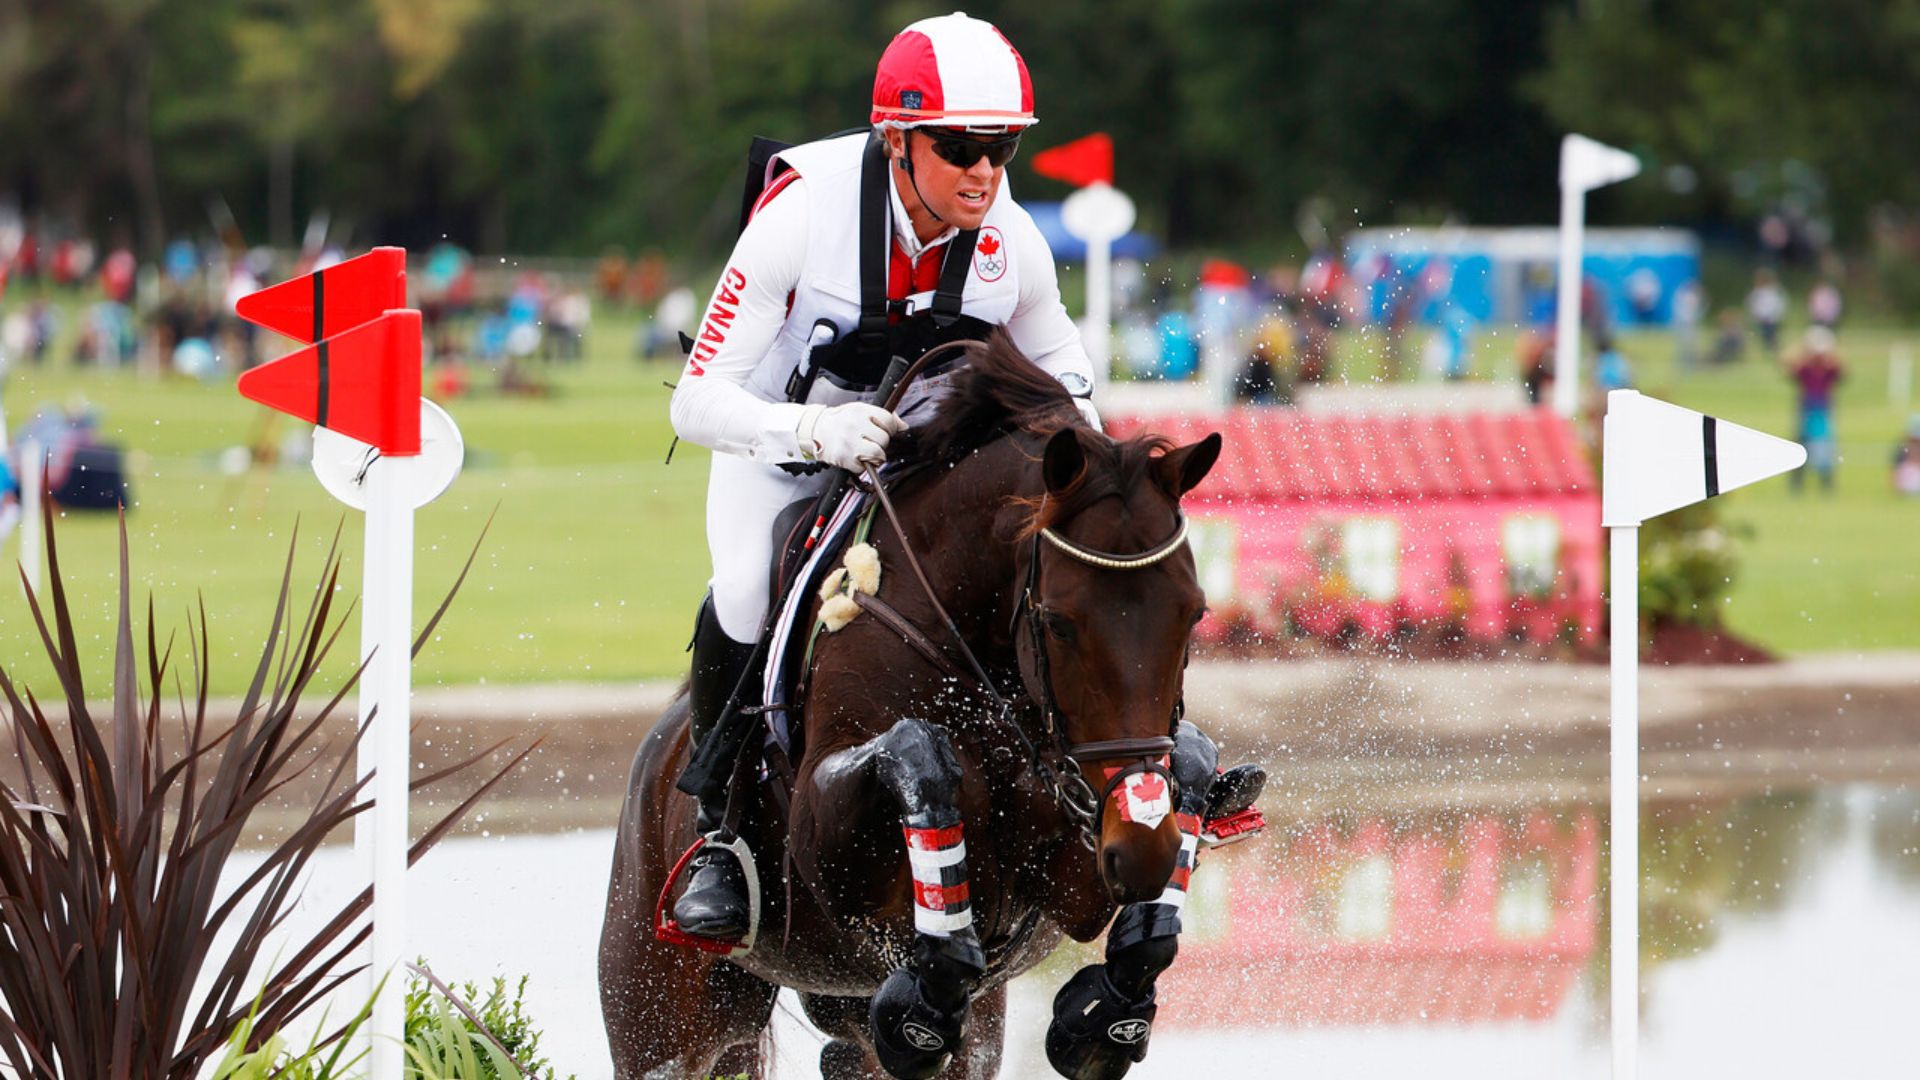 Complete Equestrian Eventing: Gold for Canada and the United States